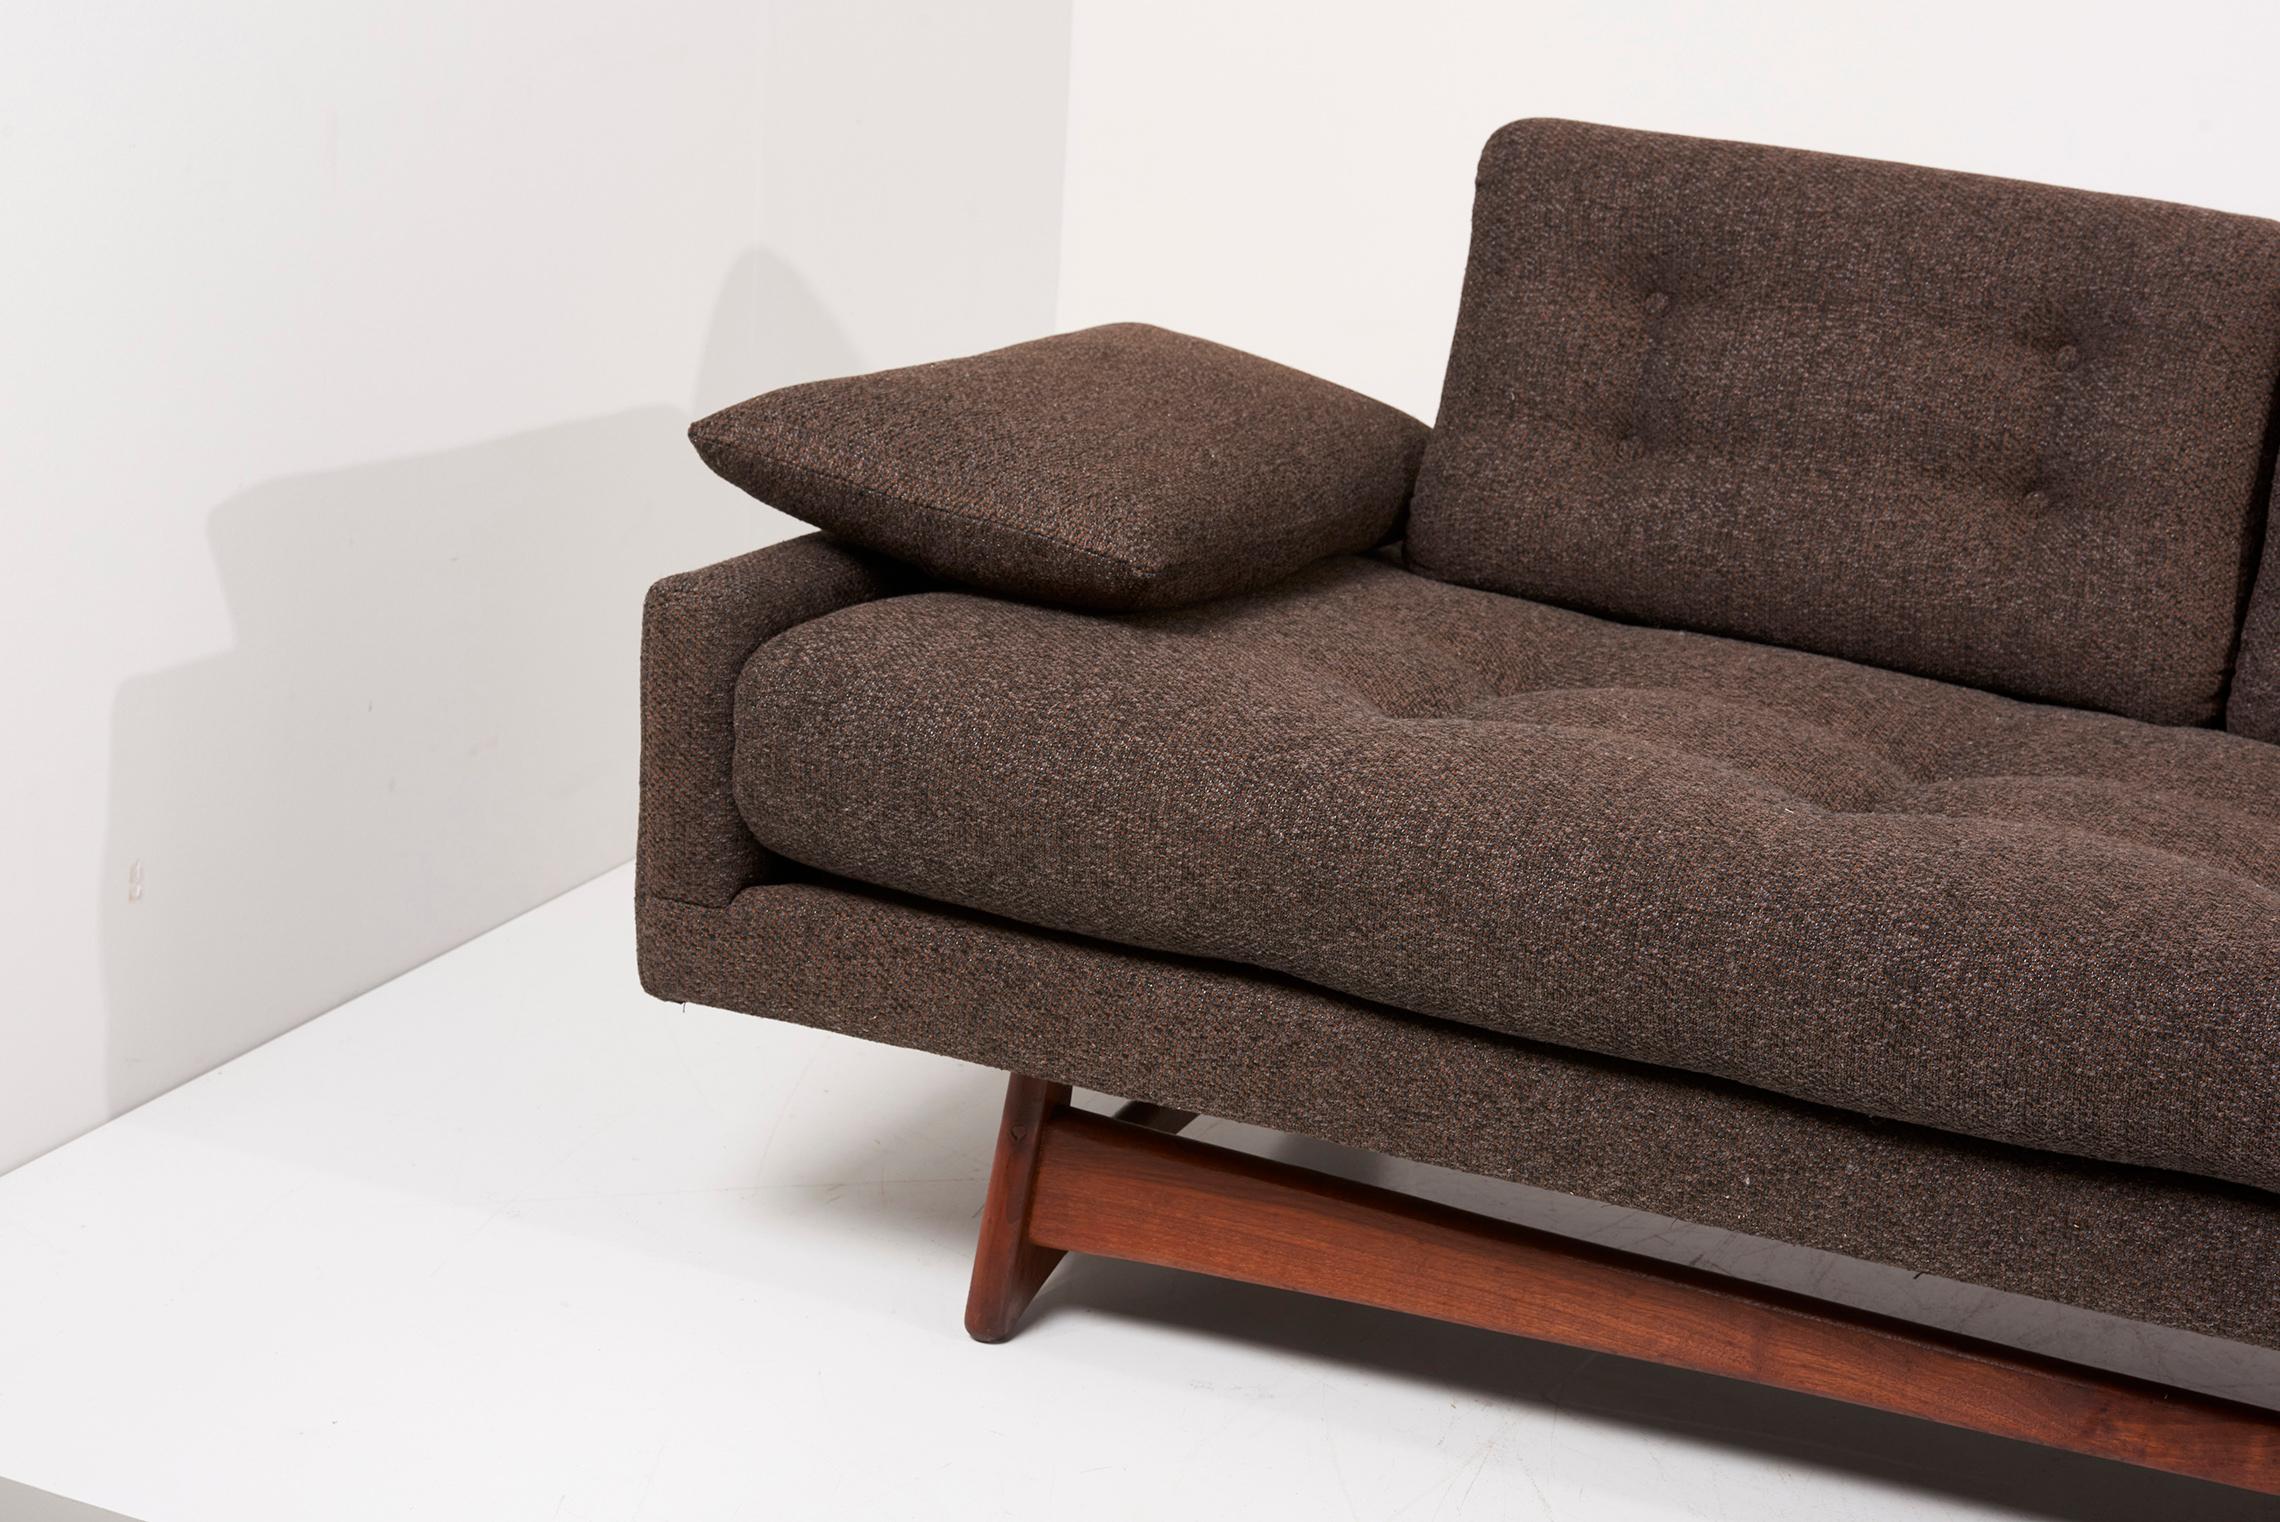 Mid-20th Century Adrian Pearsall 'Gondola Sofa' in Brown Fabric for Craft Associates, USA, 1950s For Sale